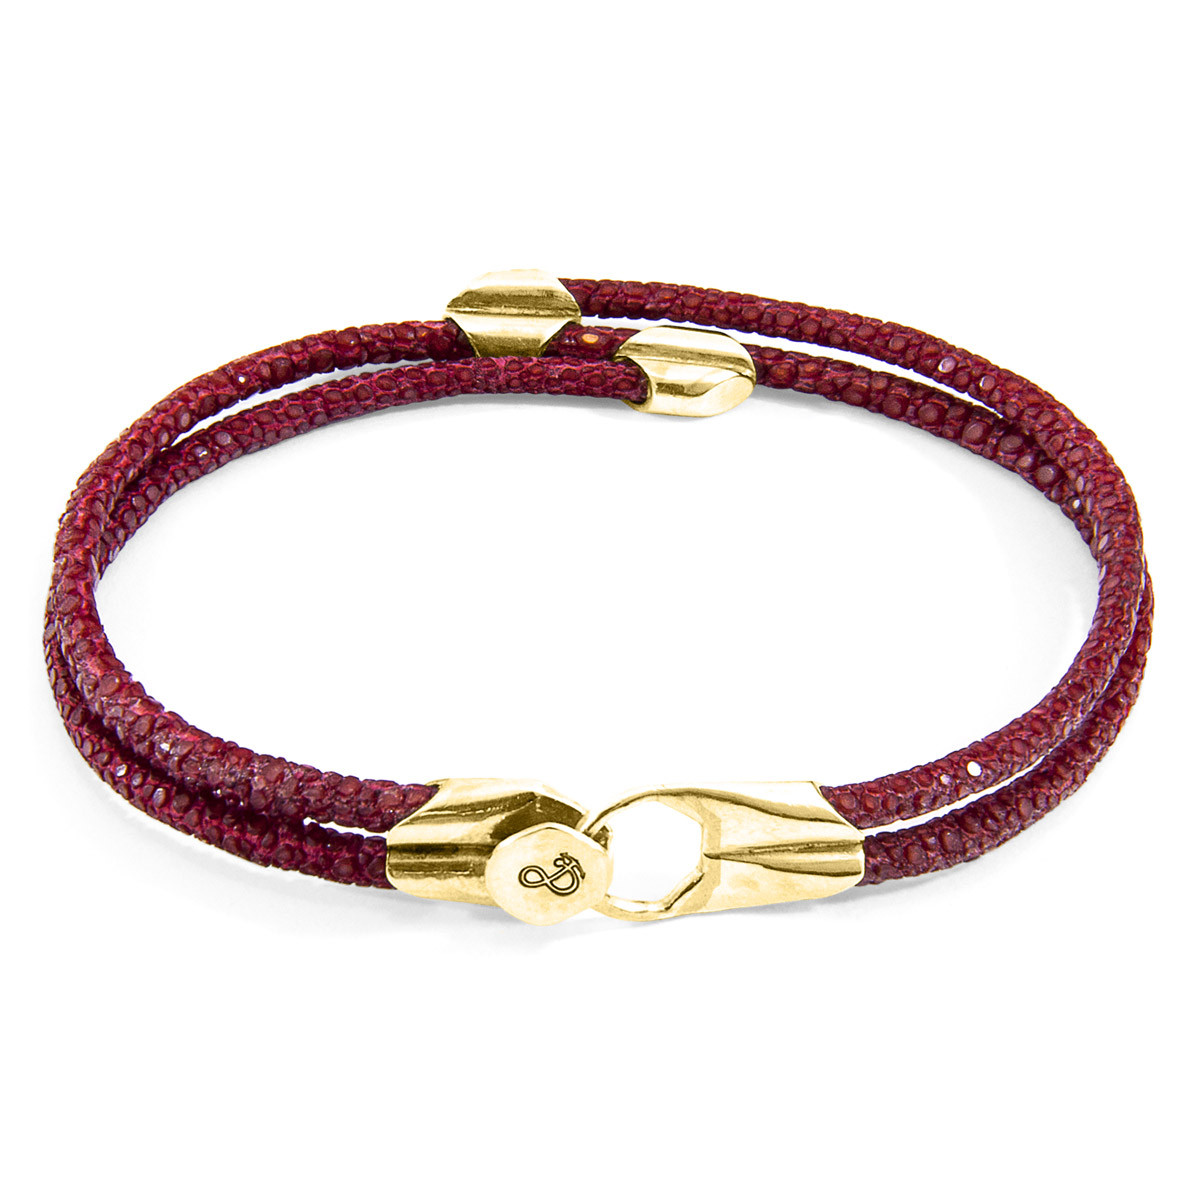 Bordeaux Red Conway 9ct Yellow Gold and Stingray Leather Bracelet